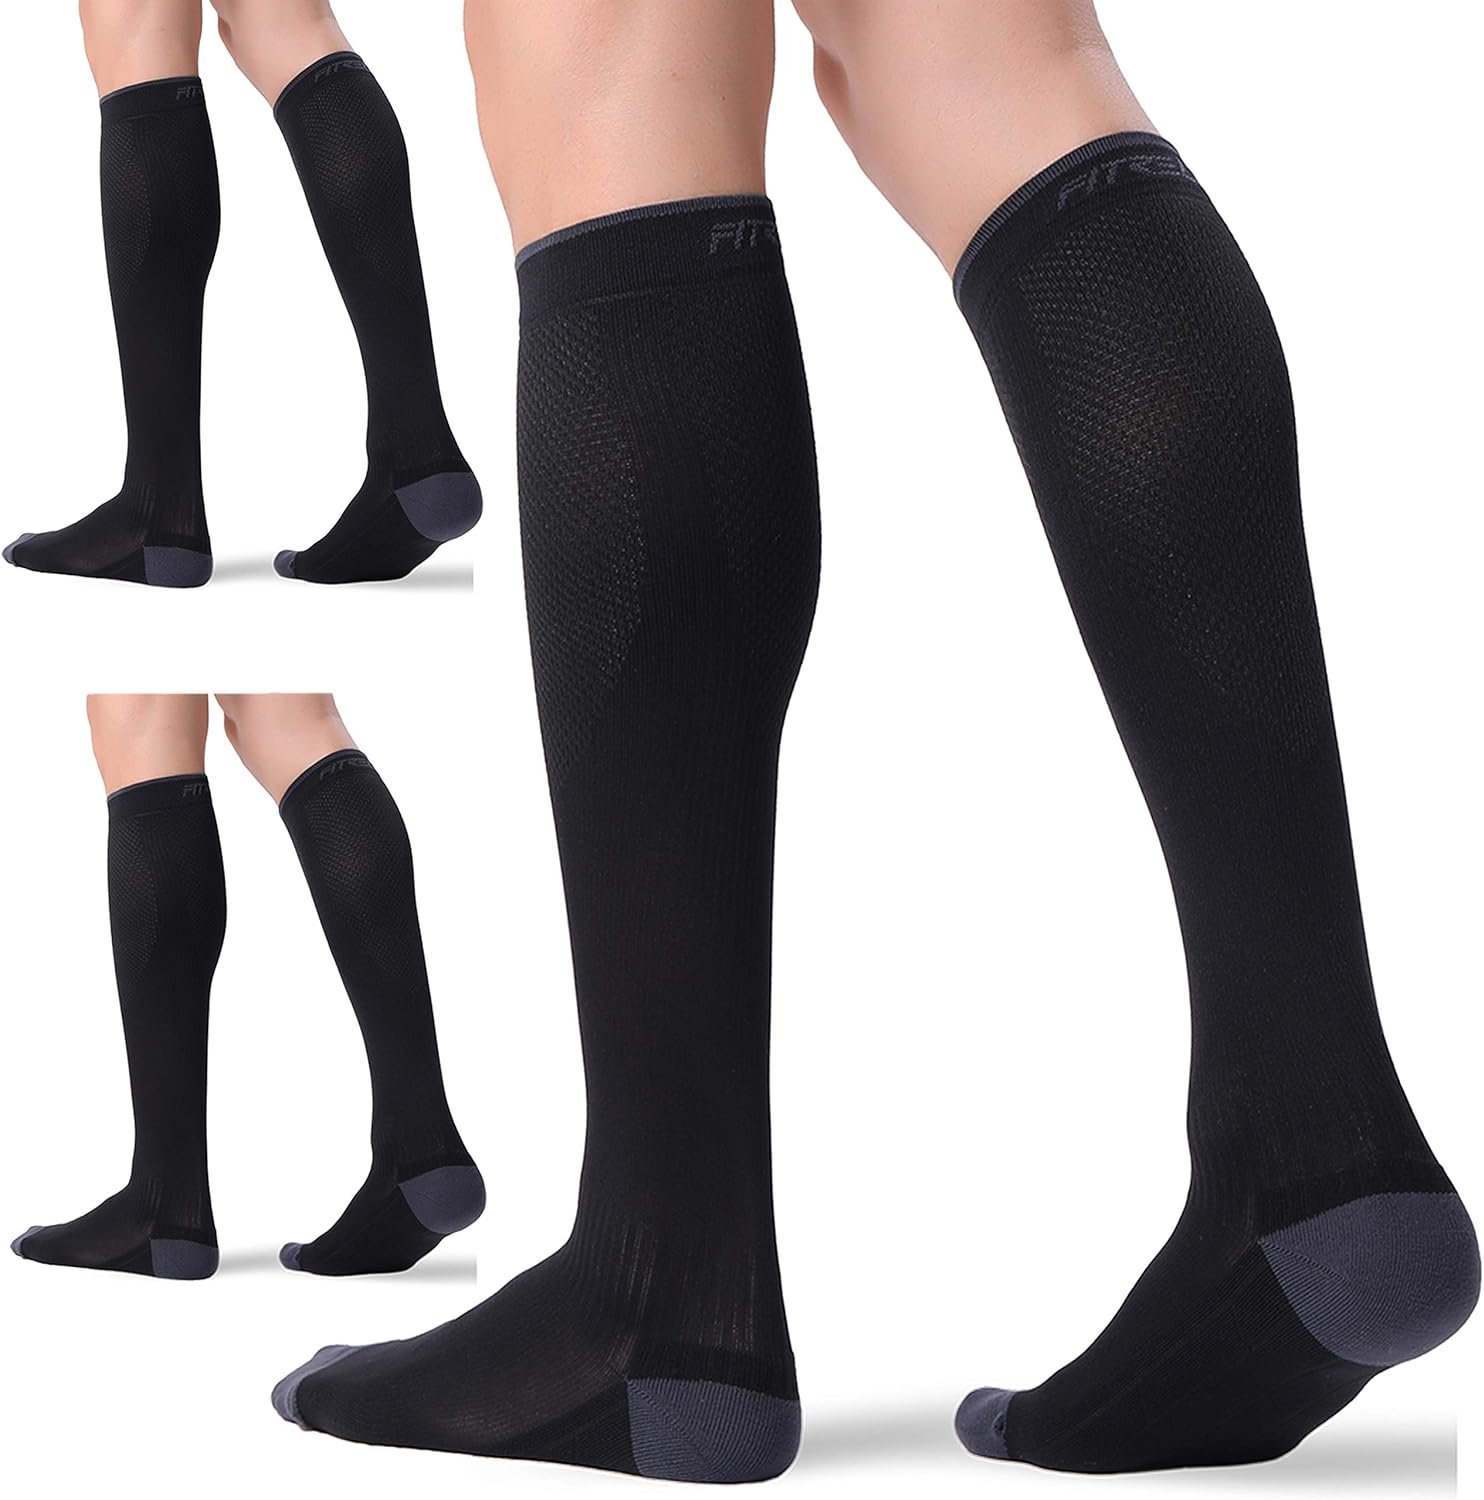 FITRELL Compression socks review